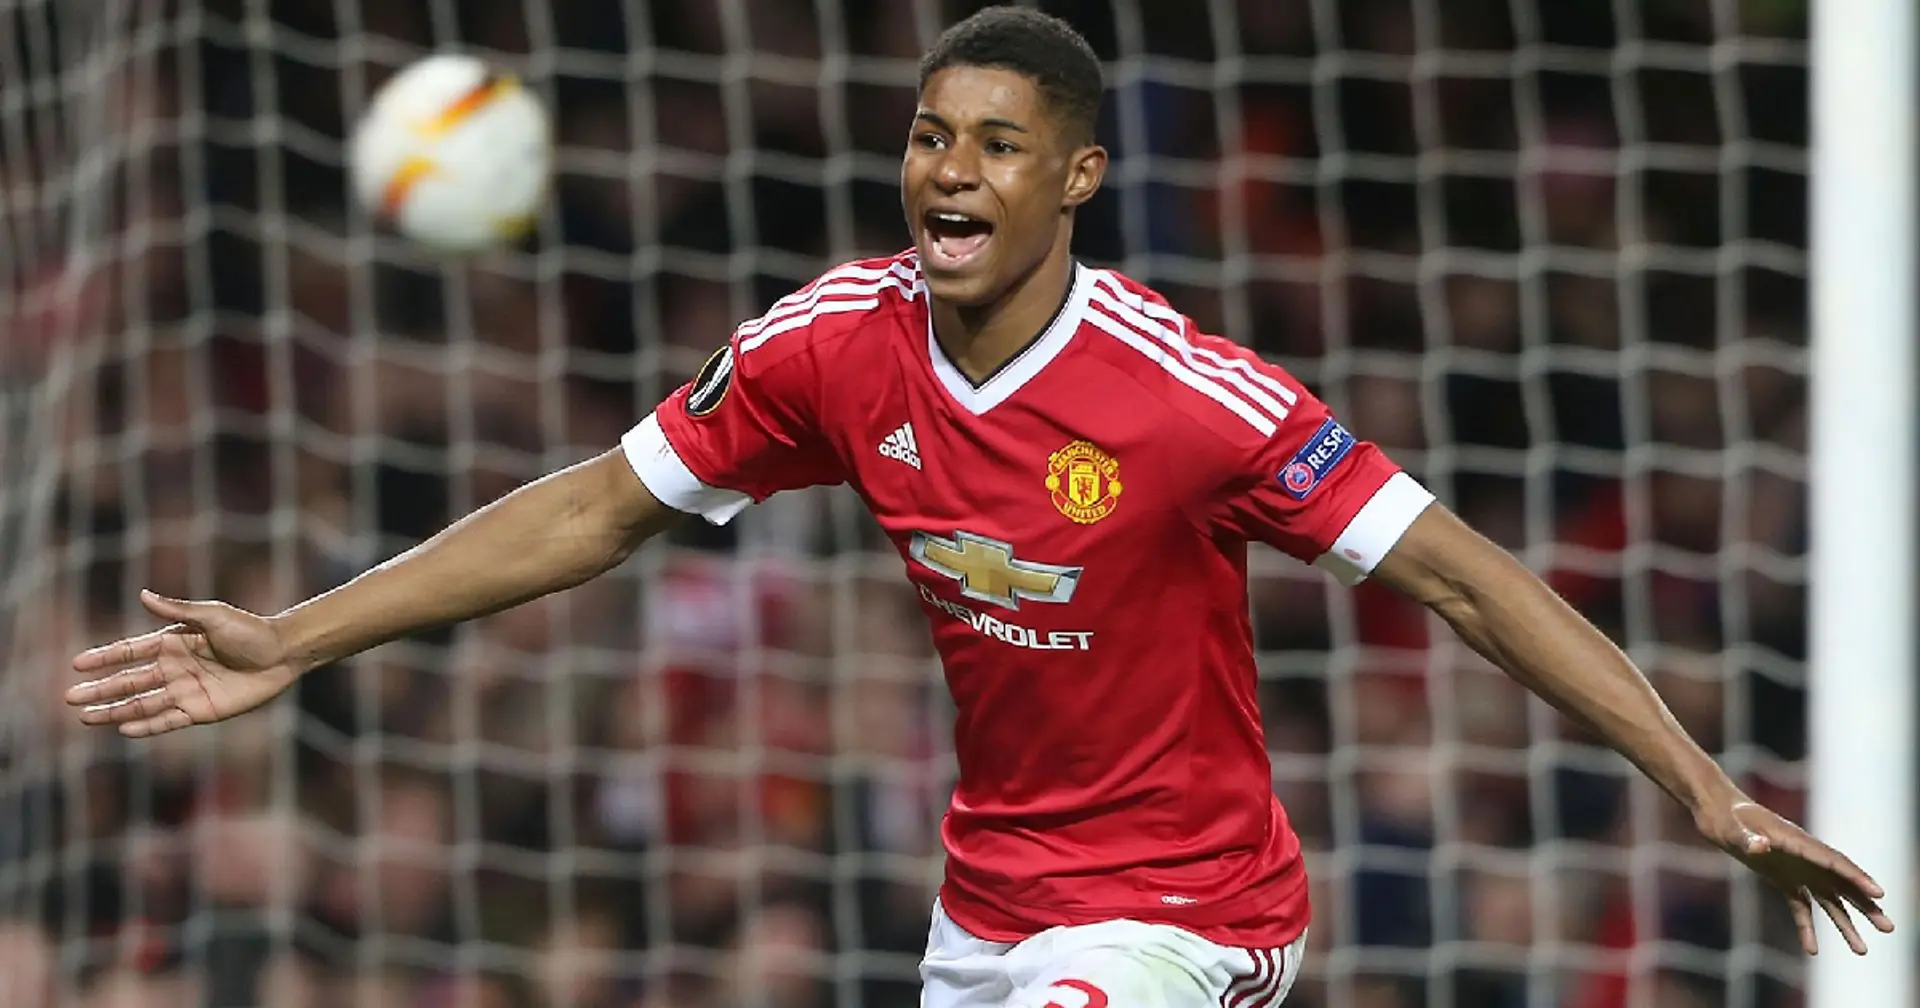 'That was probably the best night of my life': Marcus Rashford recalls his Man United debut